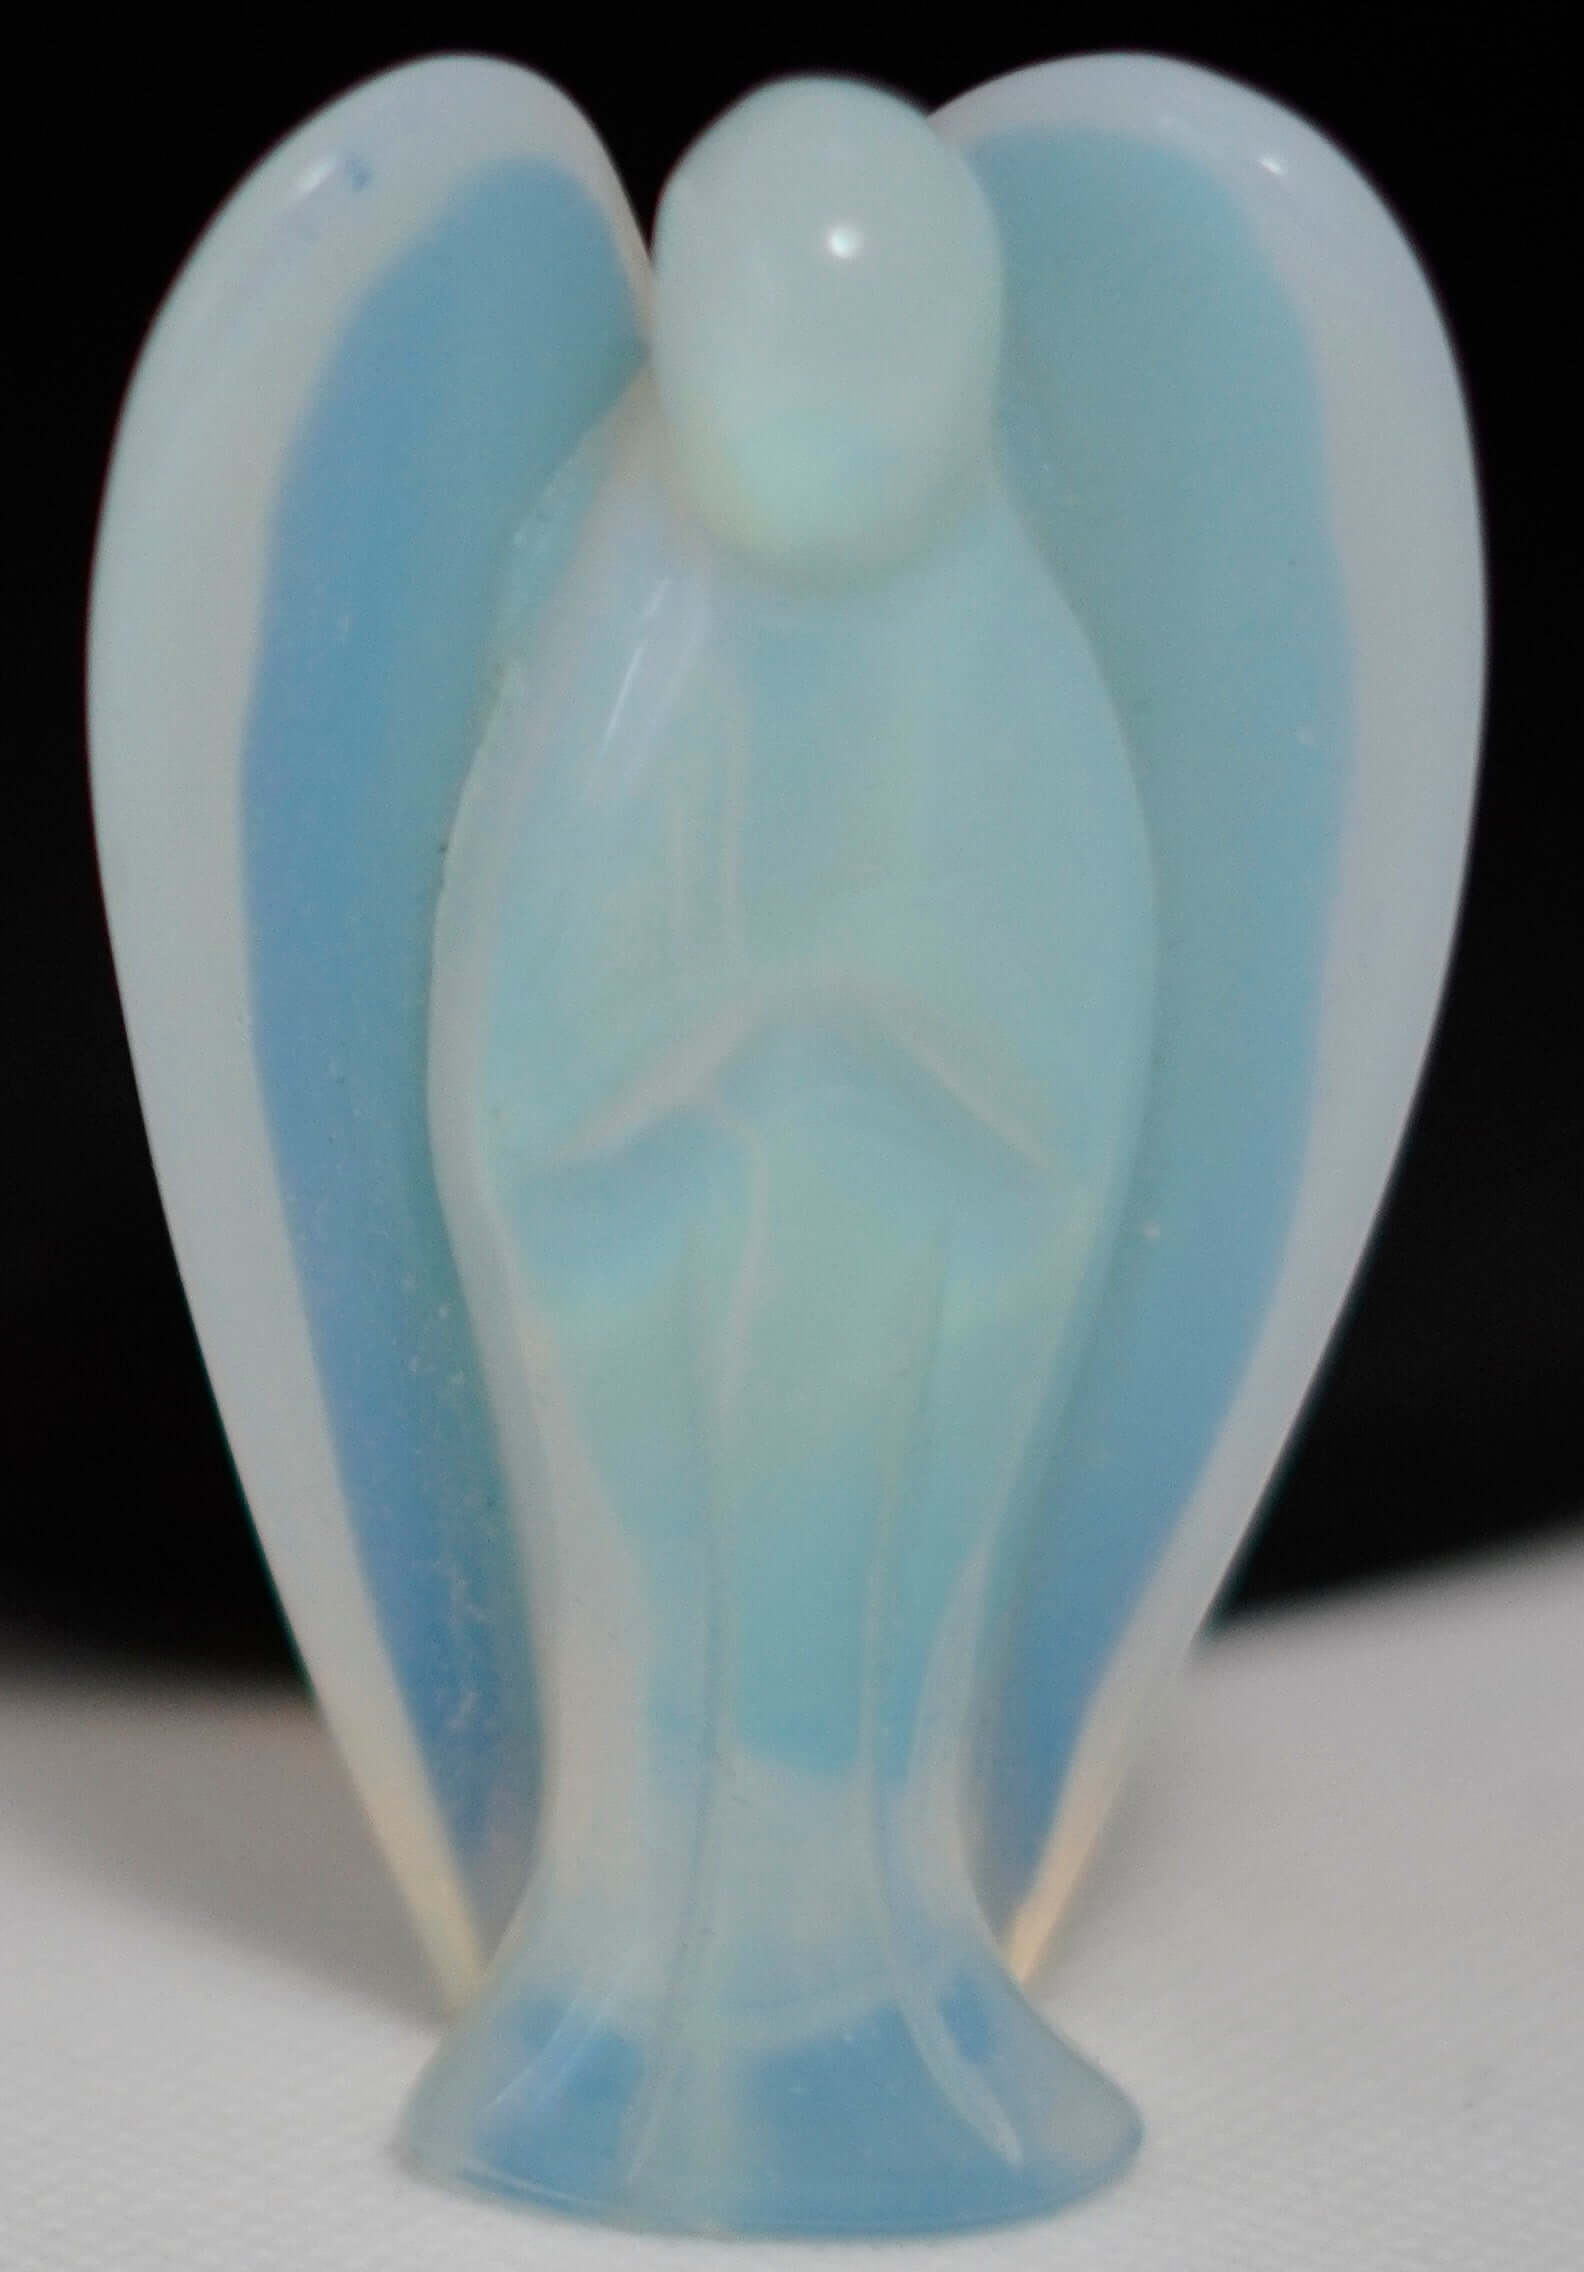 3 inch Crystal Opal Angel Figurine
Acid Secs Productions Inc.
3 inch Crystal Opal Angel Figurine Note: These are Local Canadian Stock. They will be packaged extremely safely and delivered by Canada Post/UPS/DHL/Other Local Couriers.
Crystal, Crystals, decor, Elegant, figurine, natural crystal, natural stones, Opal, polished, Quartz, Specialty Items, stone